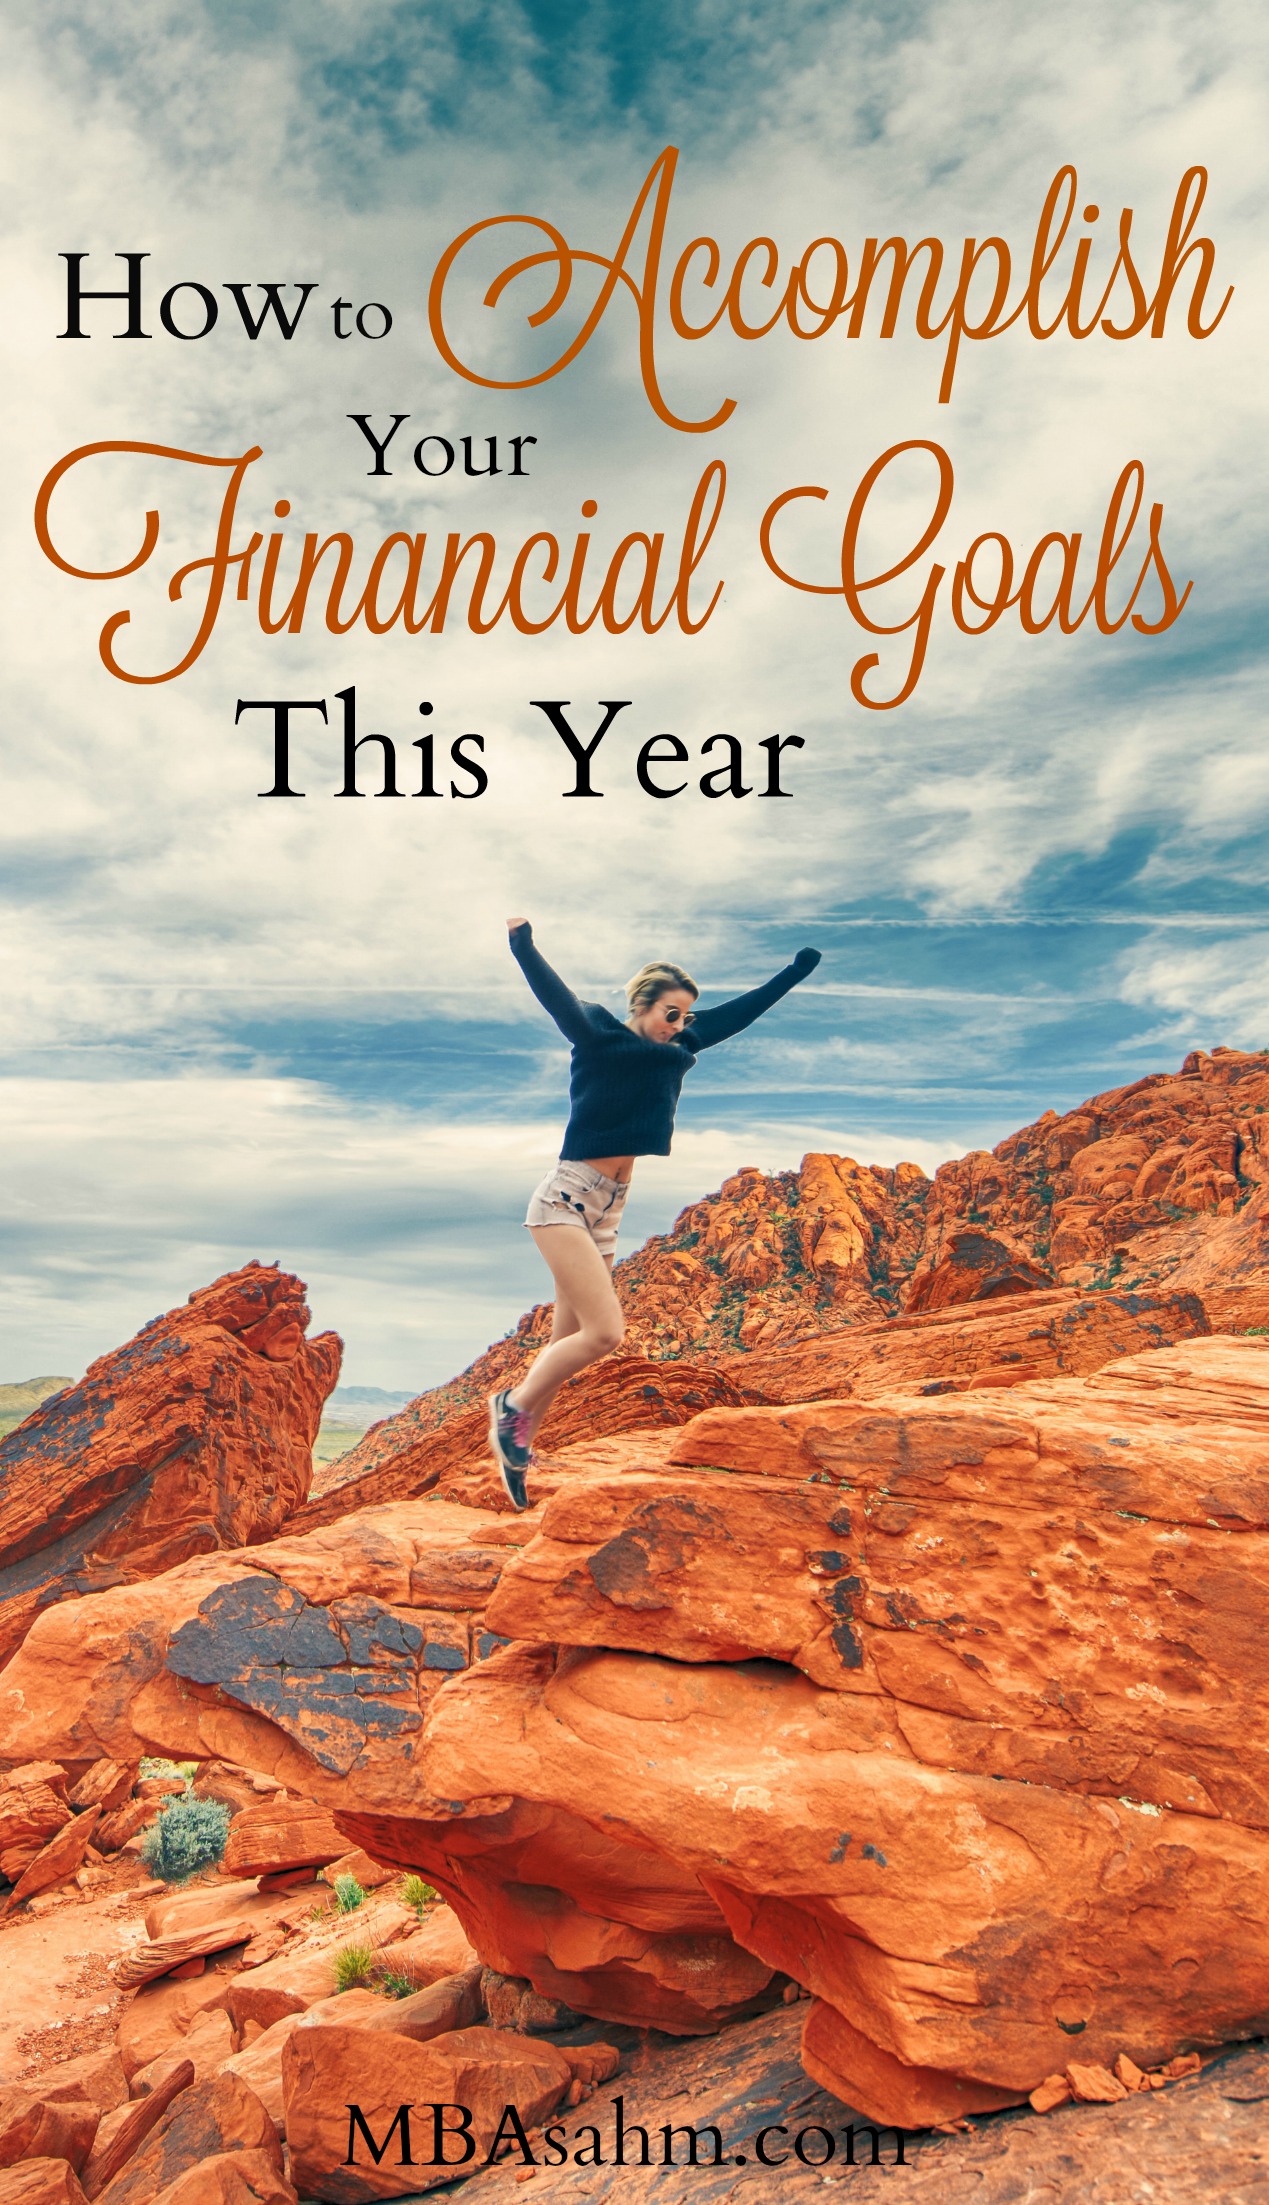 If you want to accomplish your financial goals this year, you may be closer than you think. Check out these tips and resources to help make it happen!